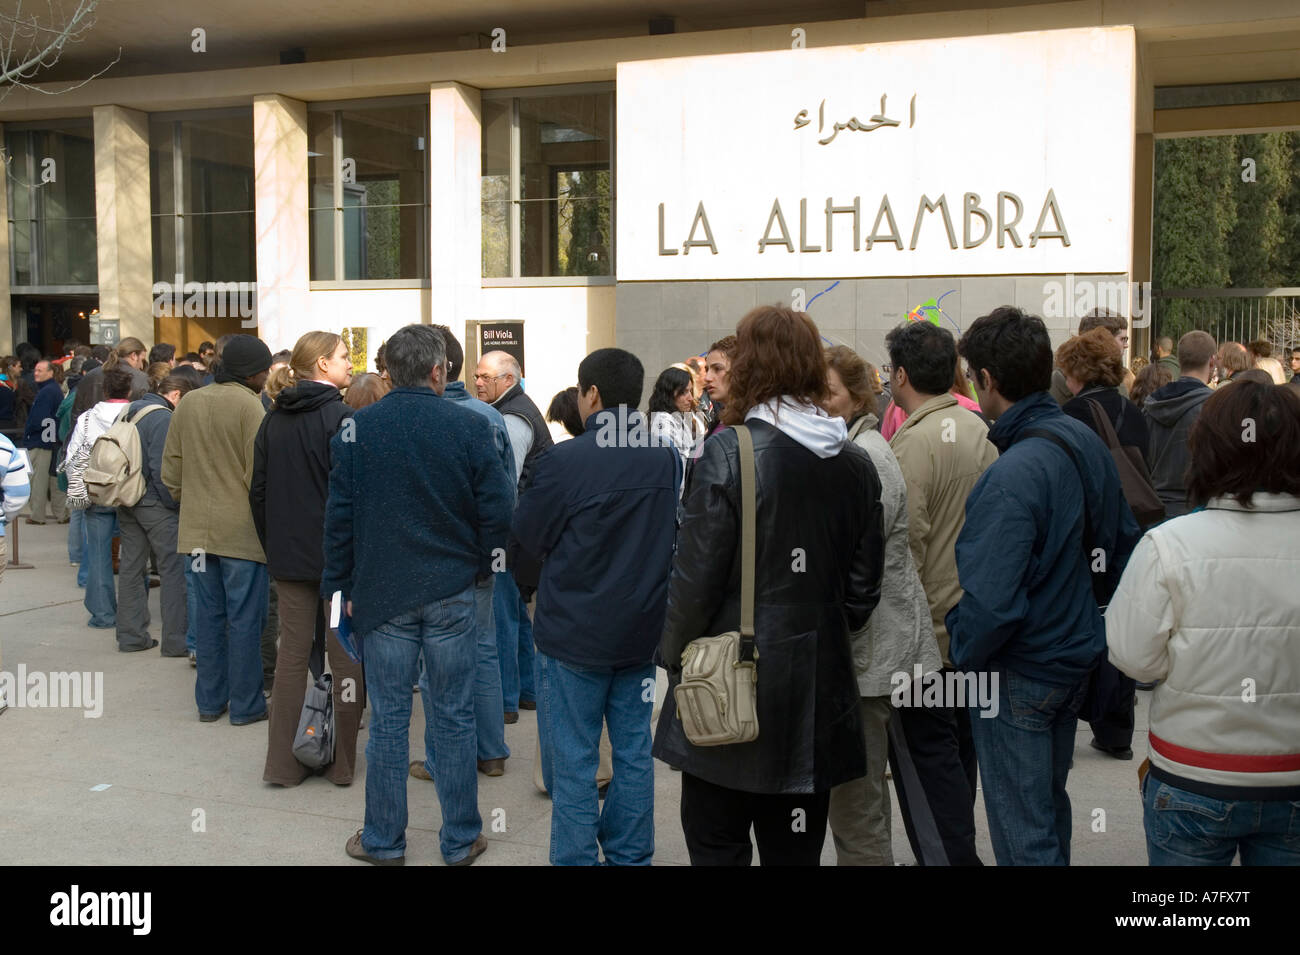 People queue at the entrance to La Alhambra Spain Stock Photo